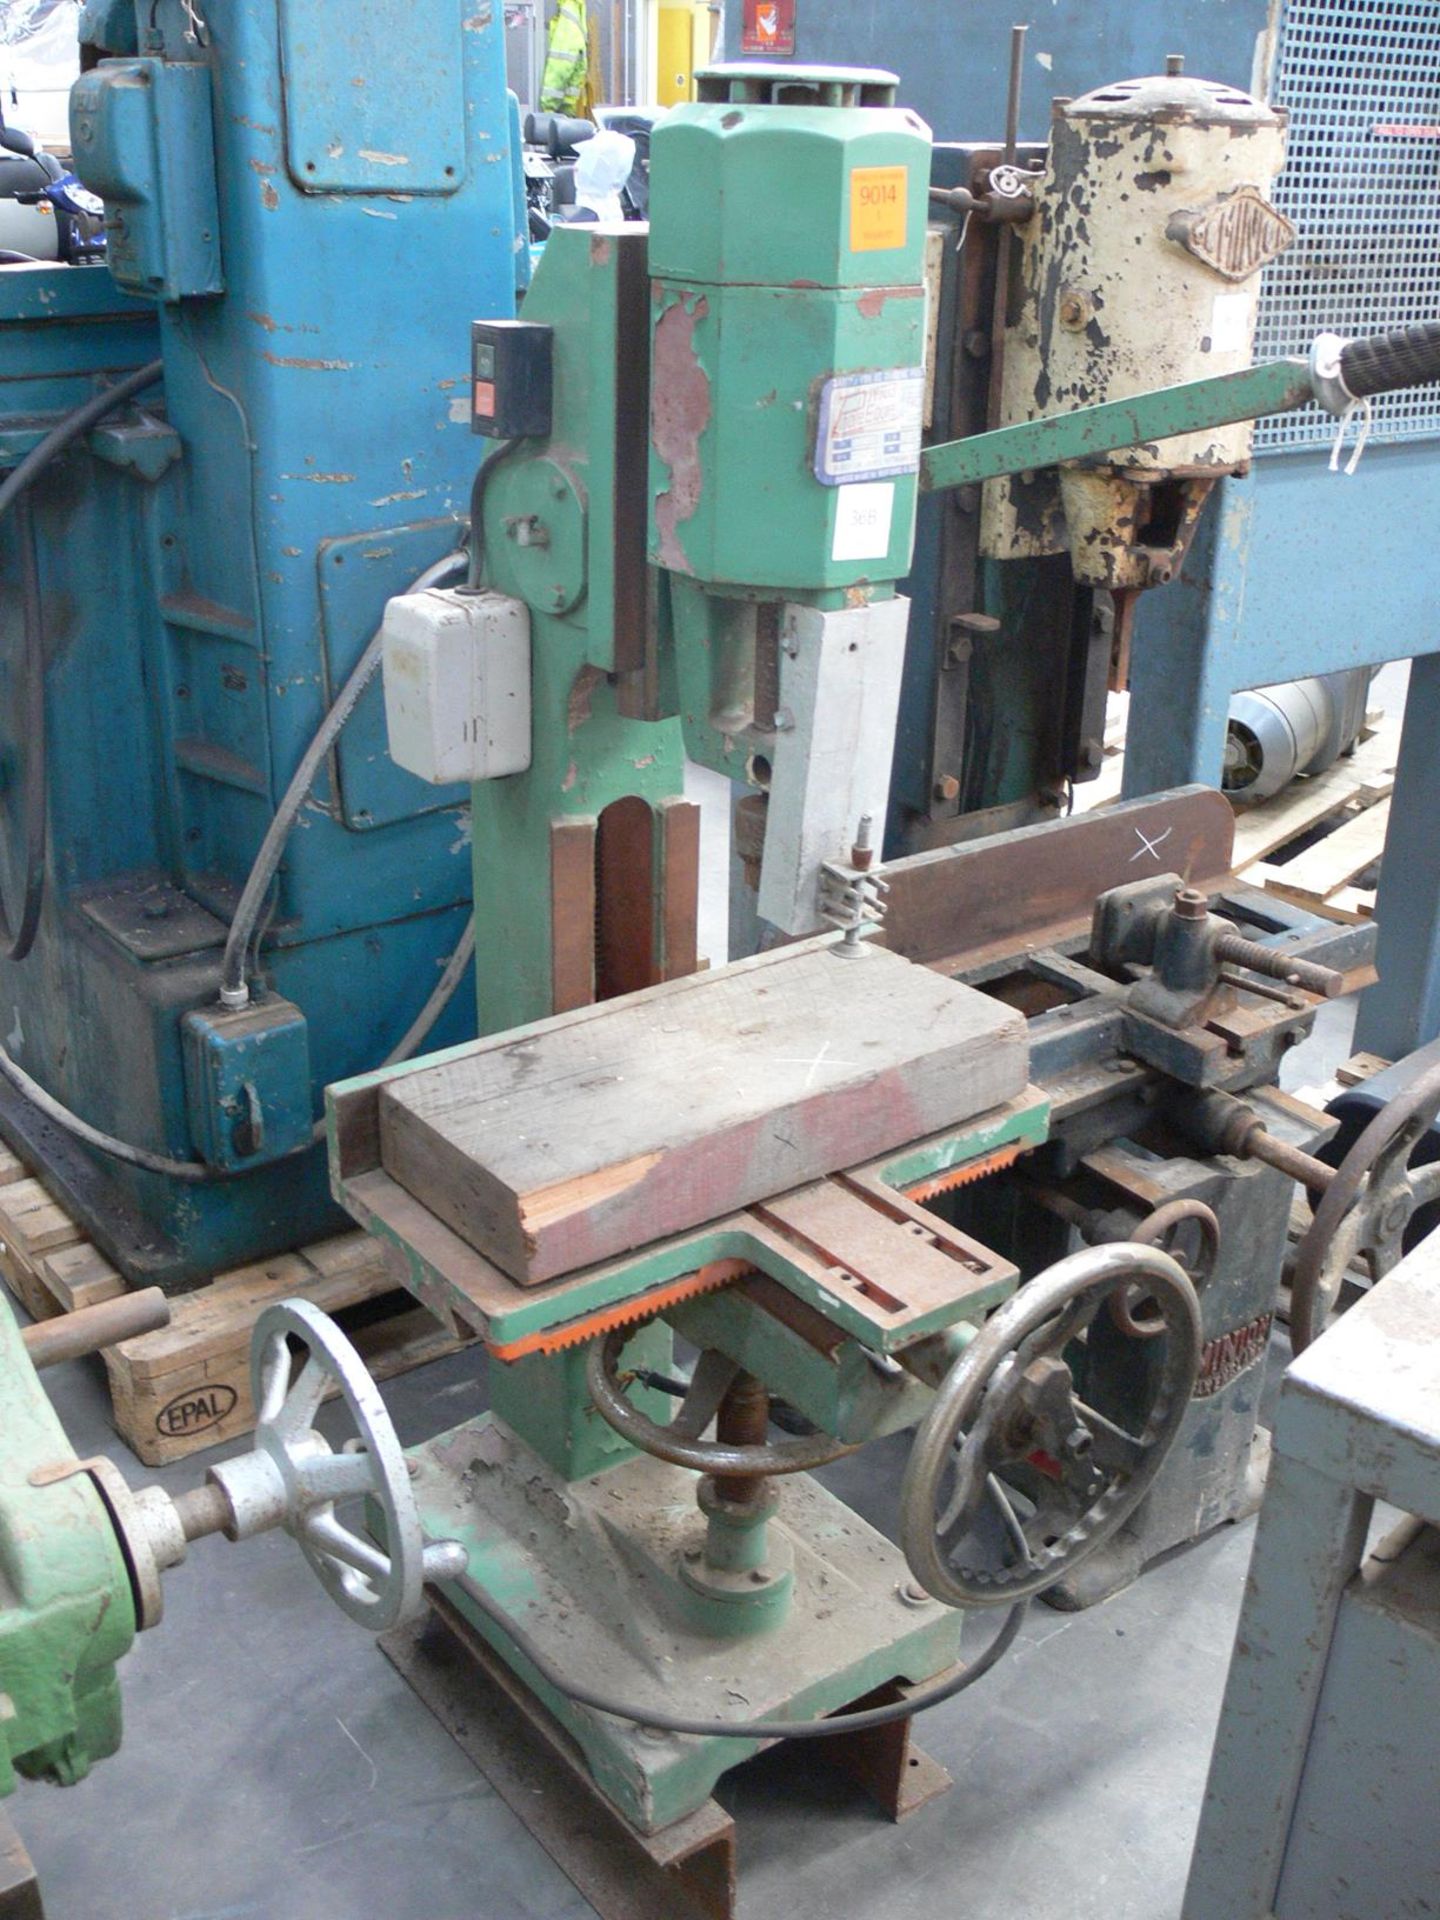 * Poole Wood Equip Chisel Morticer. Type SK314